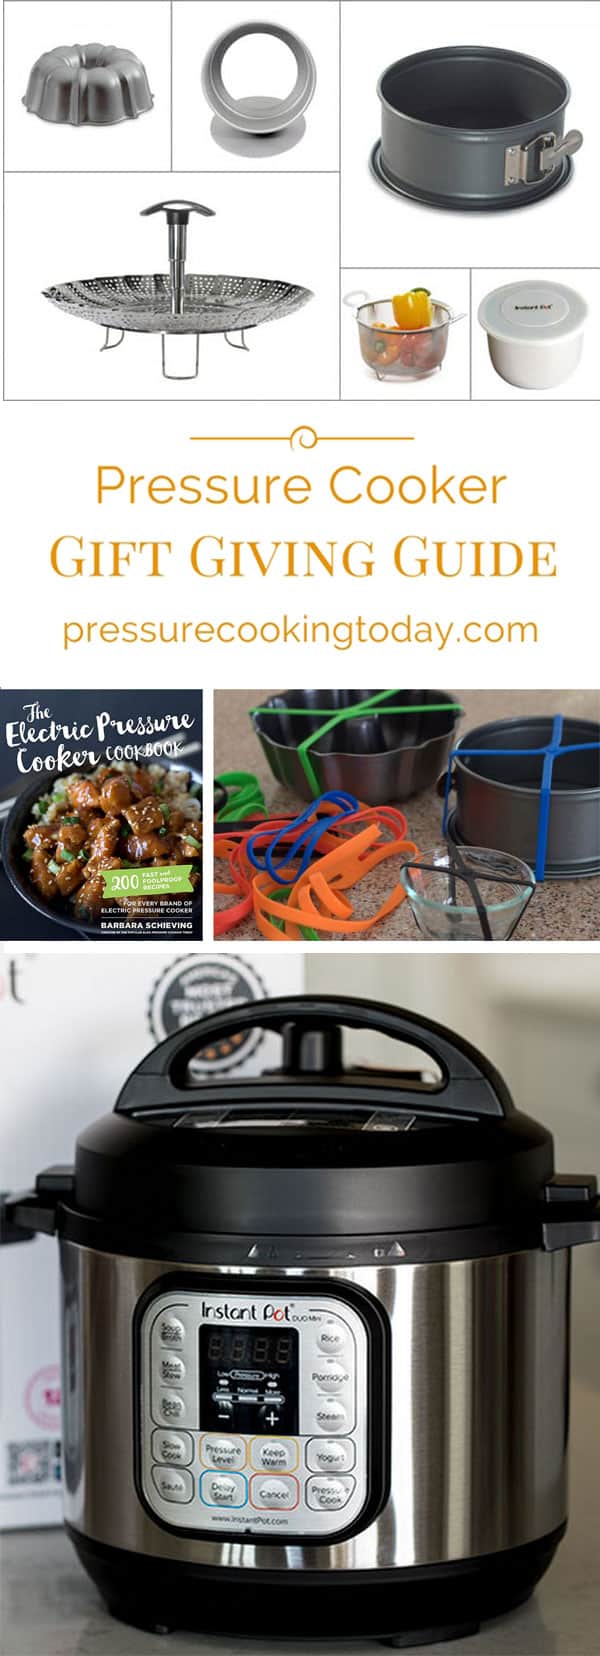 If you\'re looking for ideas to put on your wishlist, or for the pressure cooker lover in your life, check out my Electric Pressure Cooker Gift Giving Guide.